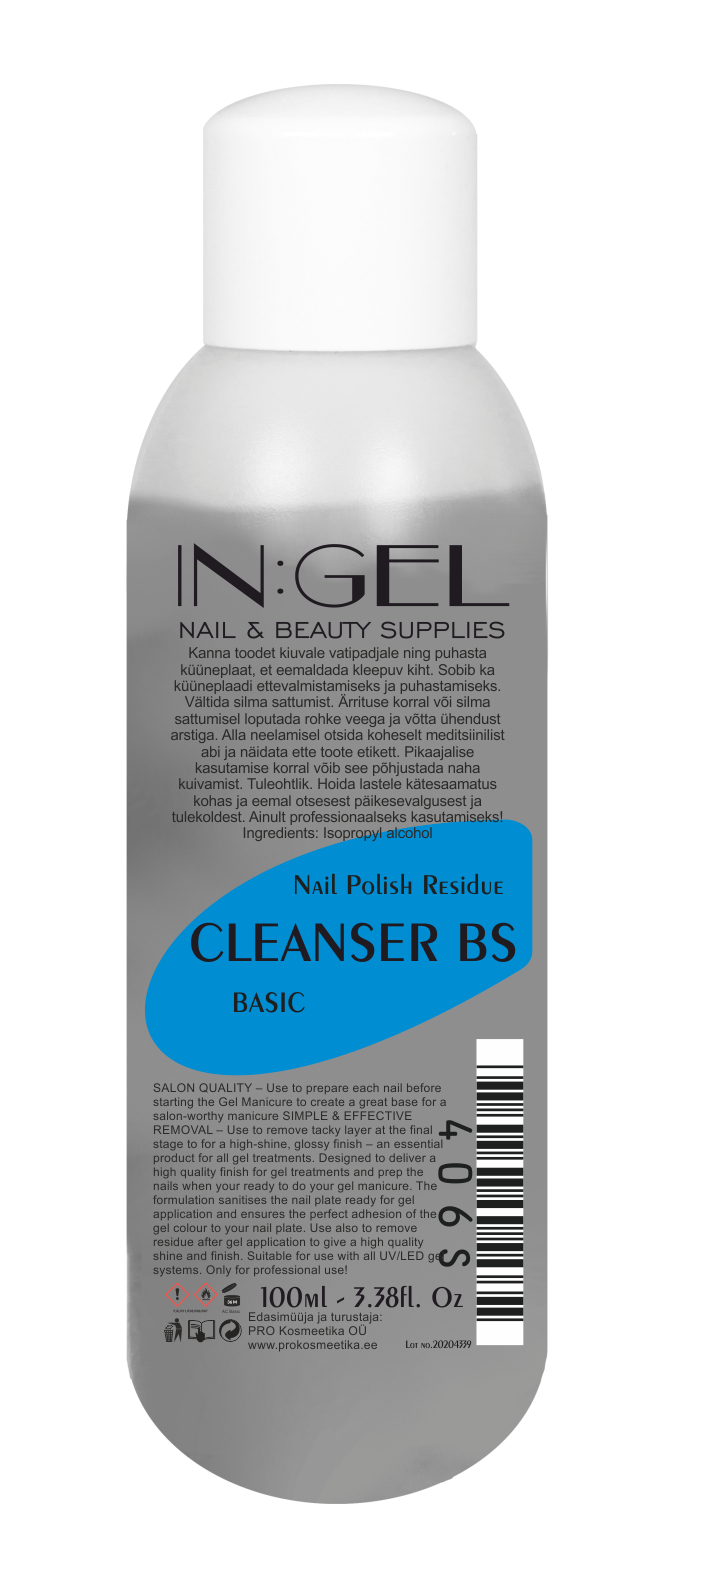 IN:GEL Nail Polish Residue Cleanser BS Basic